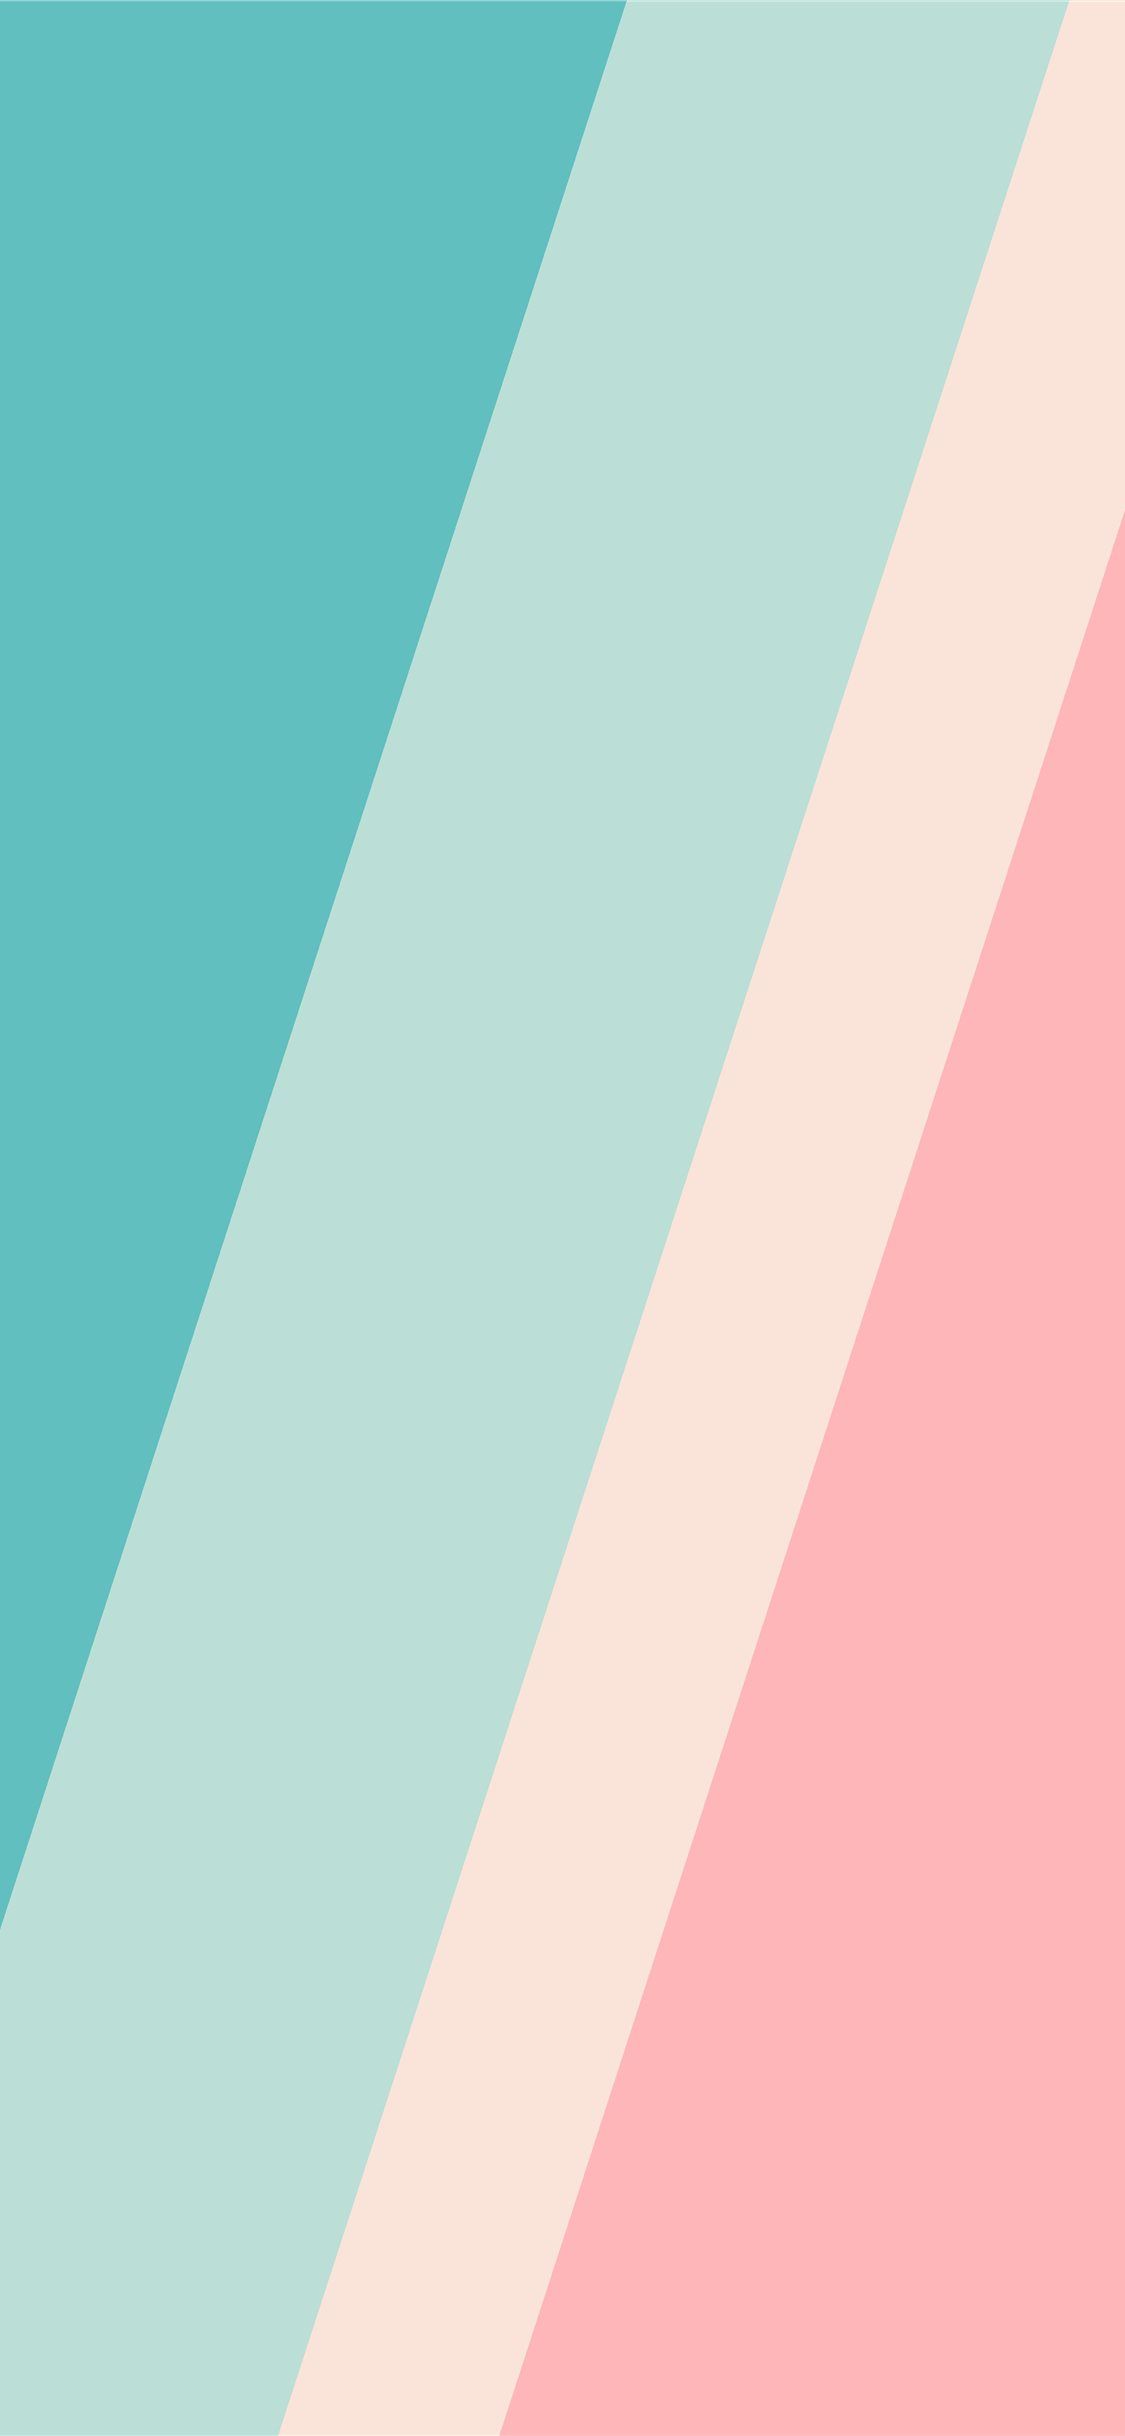 pink and teal striped textile #teal. Teal wallpaper iphone, Stripe iphone wallpaper, Teal coloured wallpaper